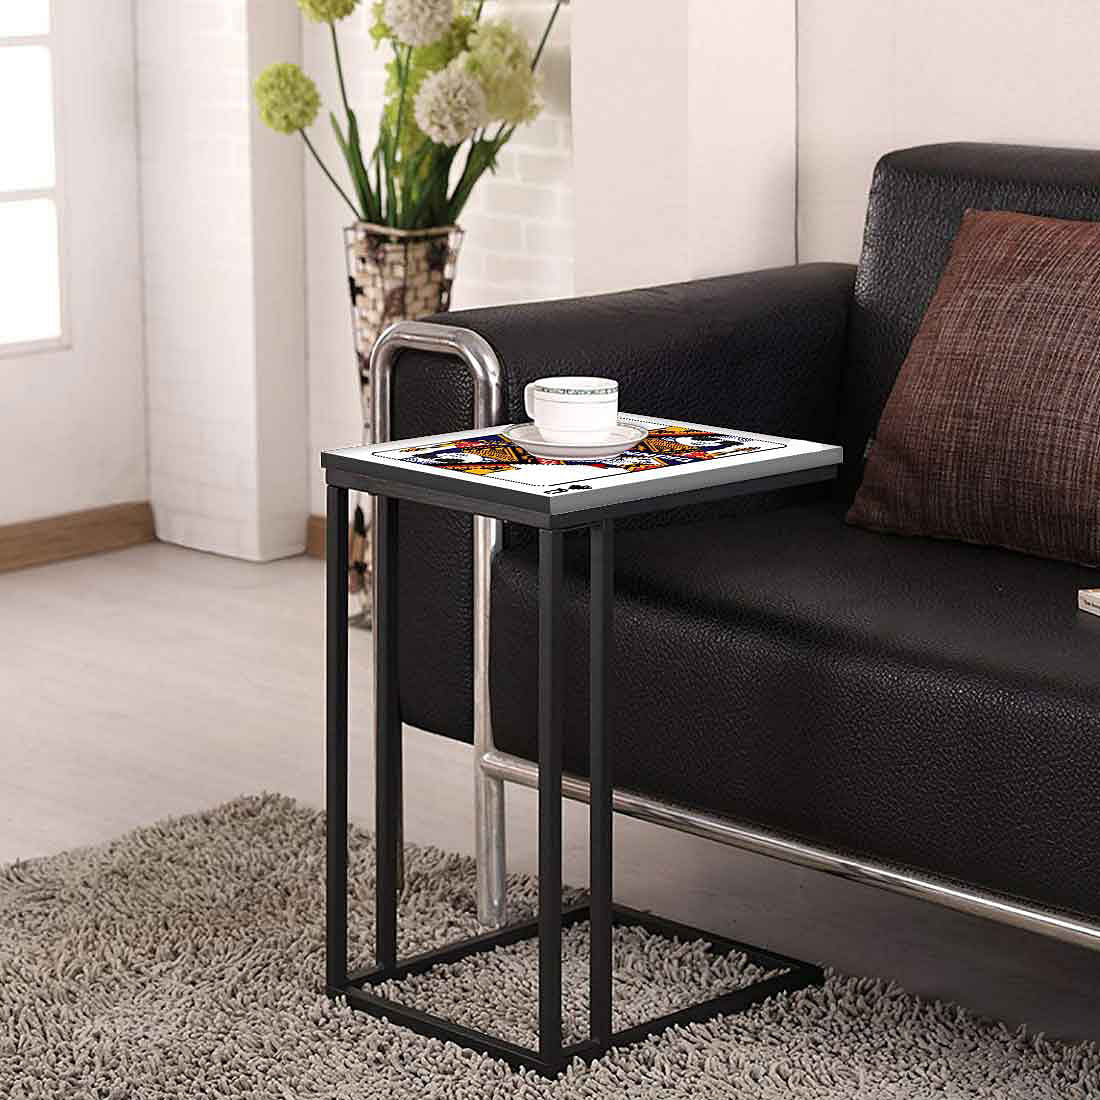 White Metal C Table For Sofa  - Queen Nutcase